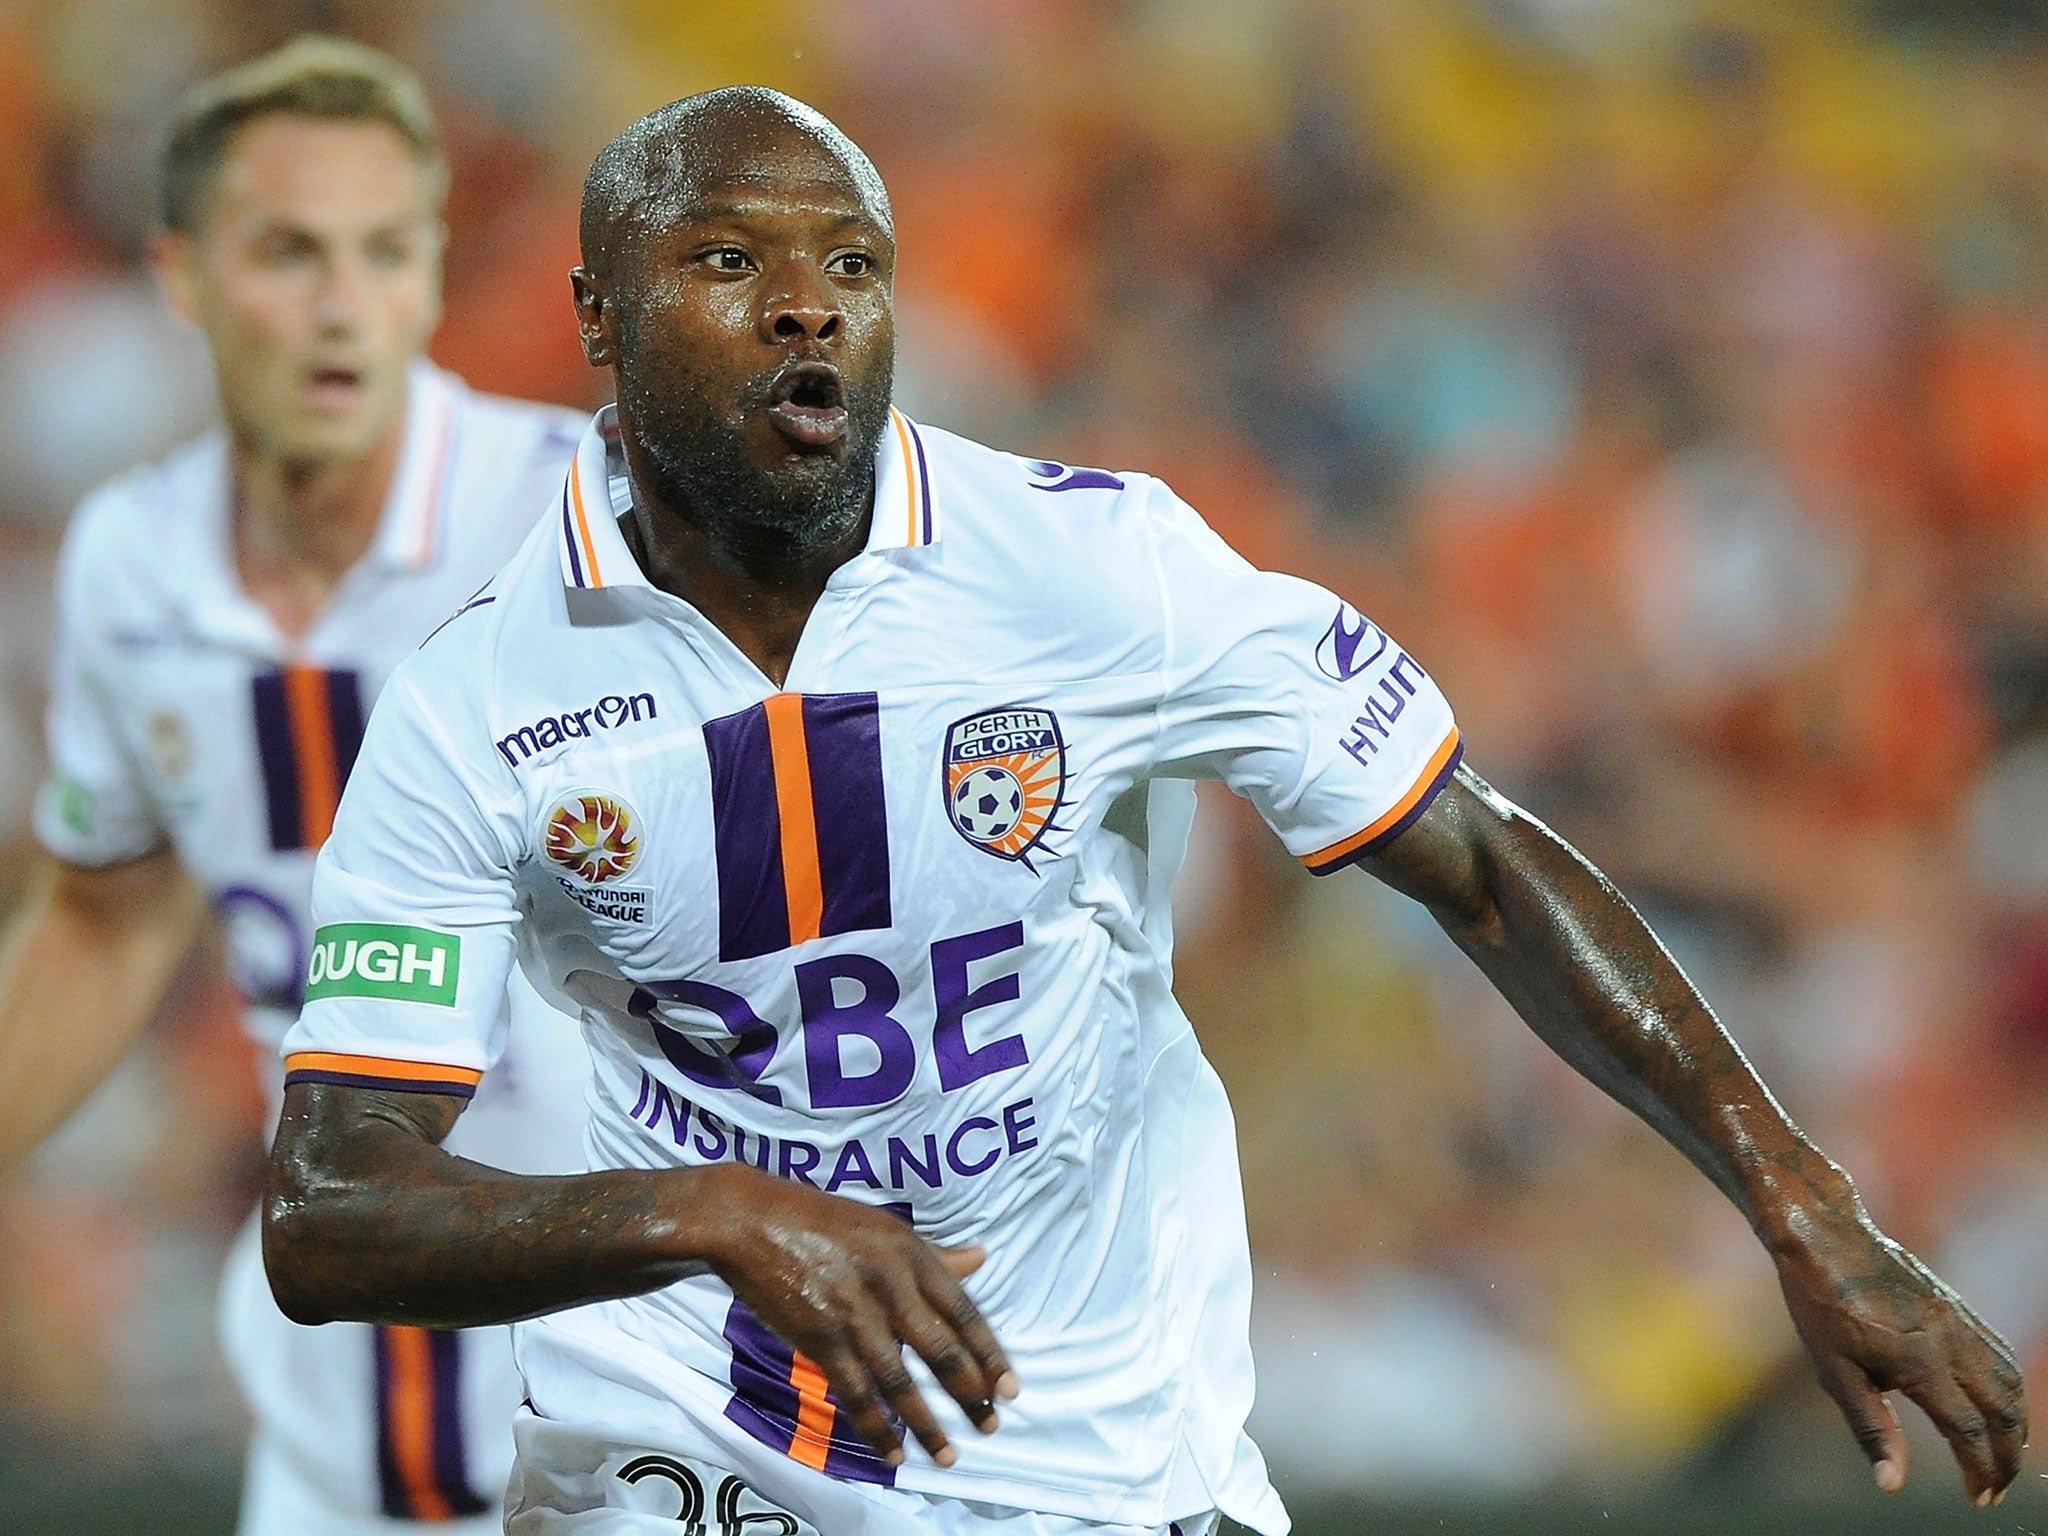 The Frenchman finished his career in Australia's A-League at Perth Glory